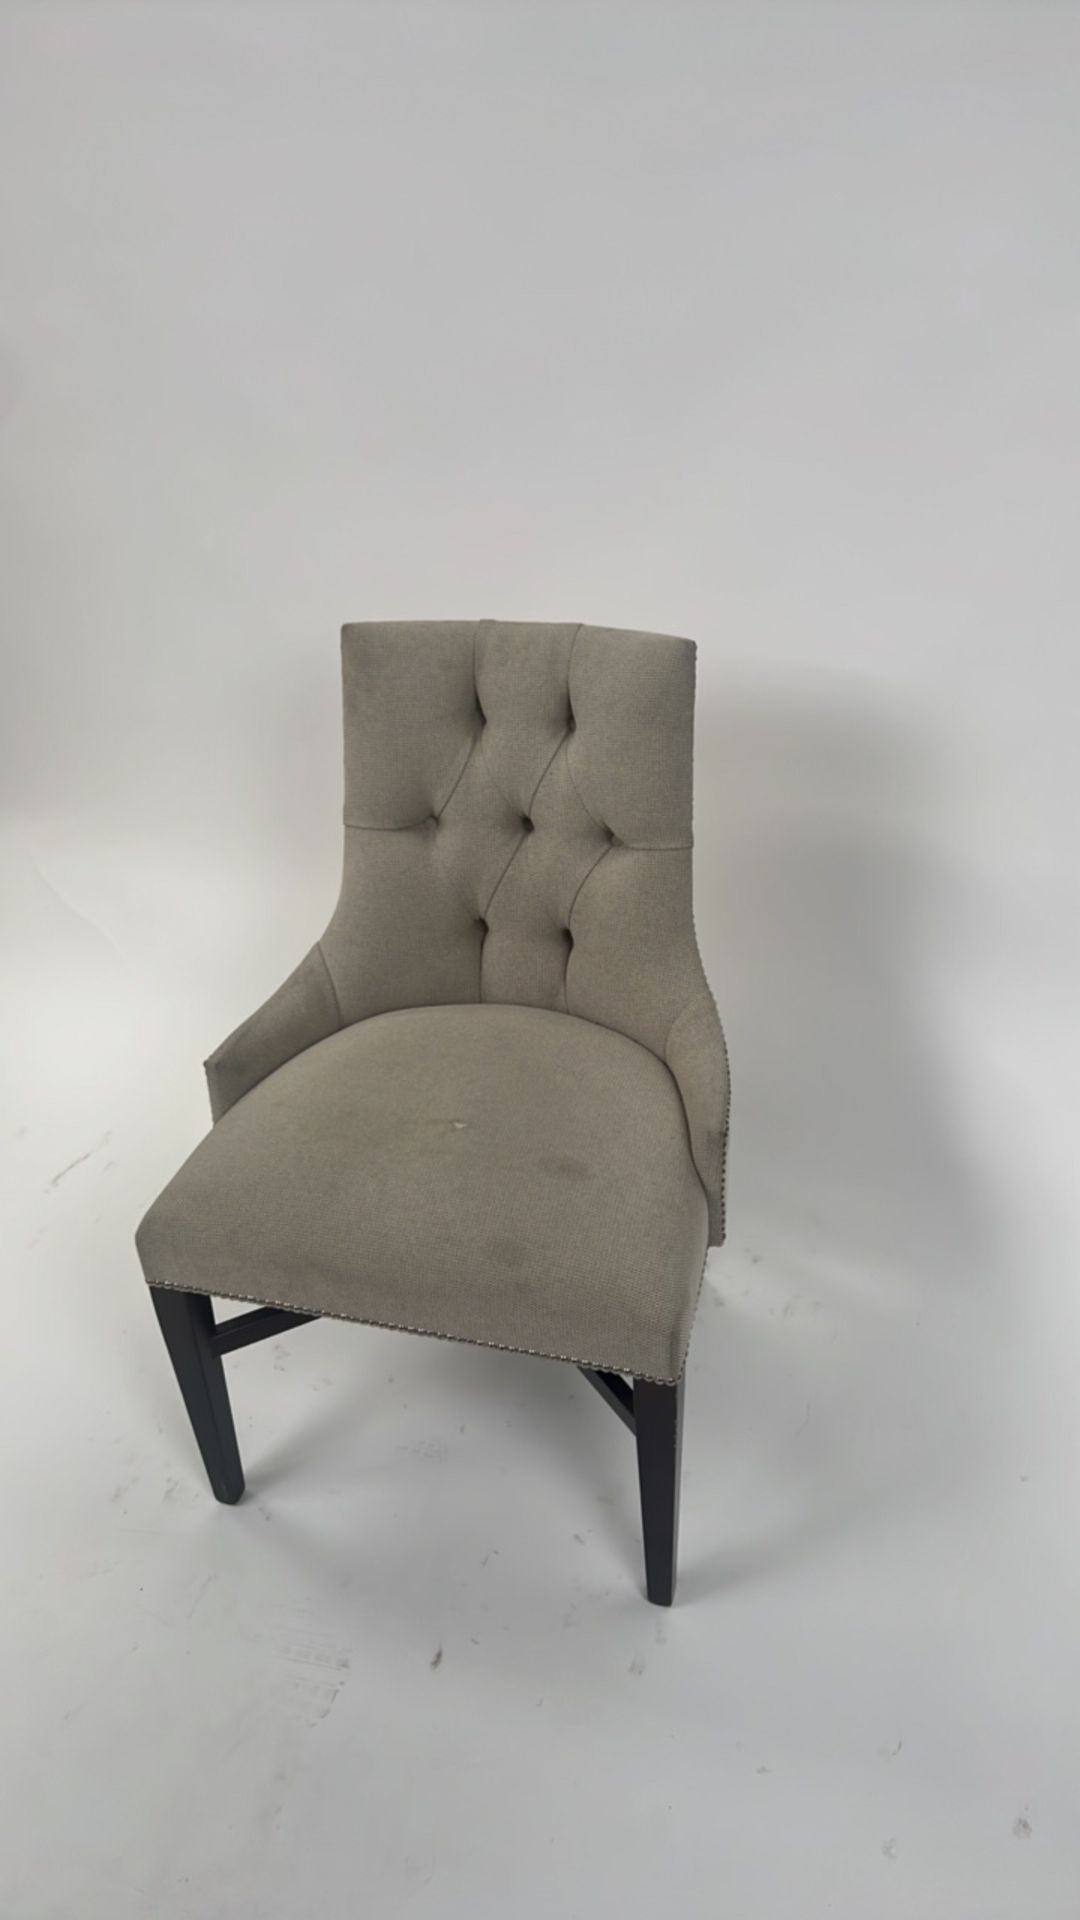 A Wooden and fabric chair - Image 2 of 4